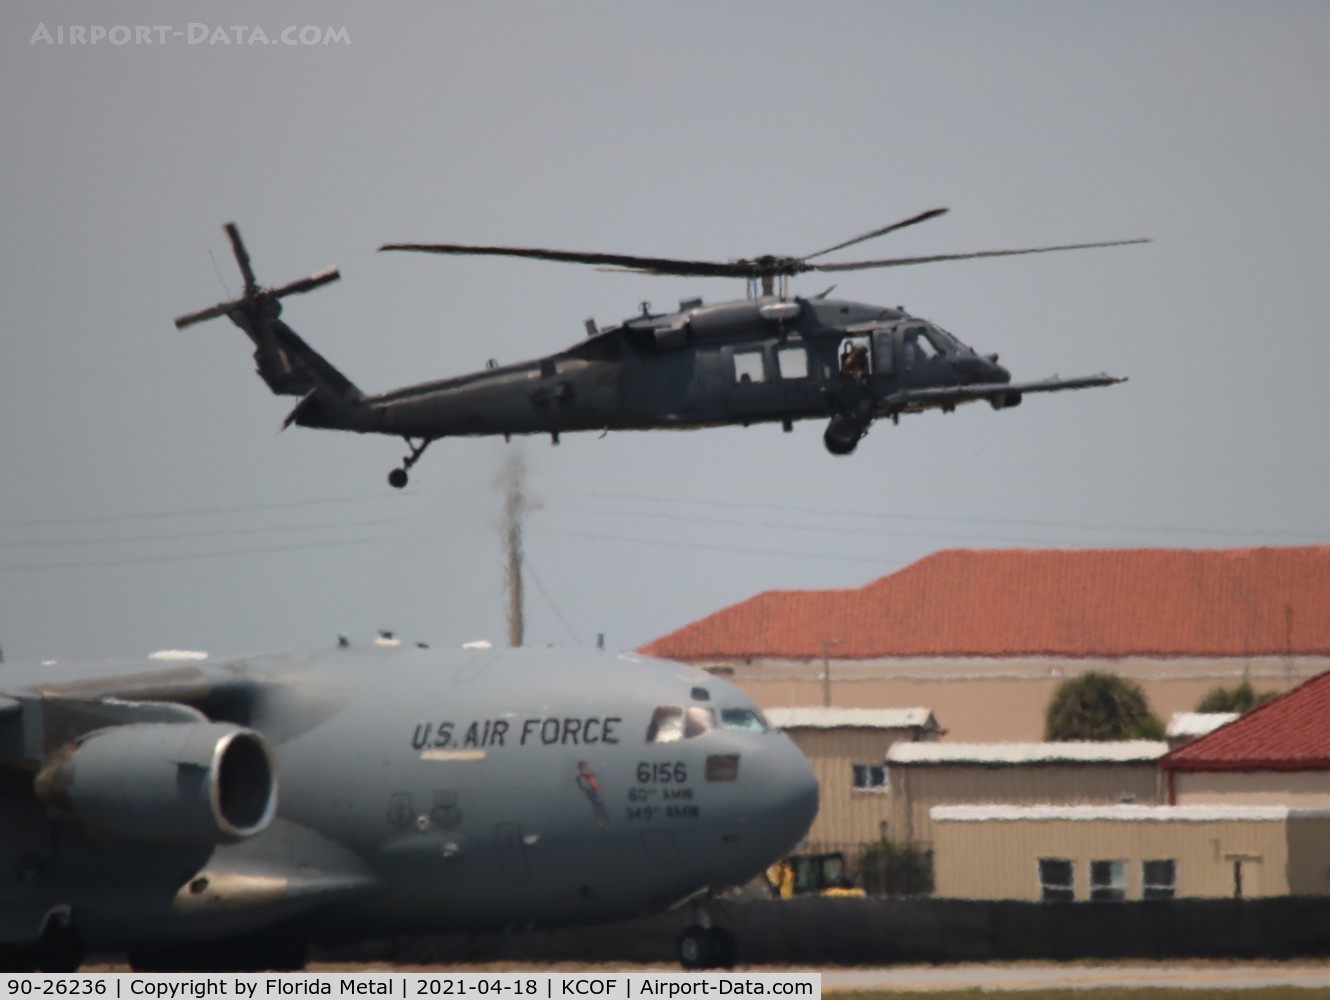 90-26236, 1990 Sikorsky MH-60G Pave Hawk C/N 70-1609, MH-60 Pave Hawk zx